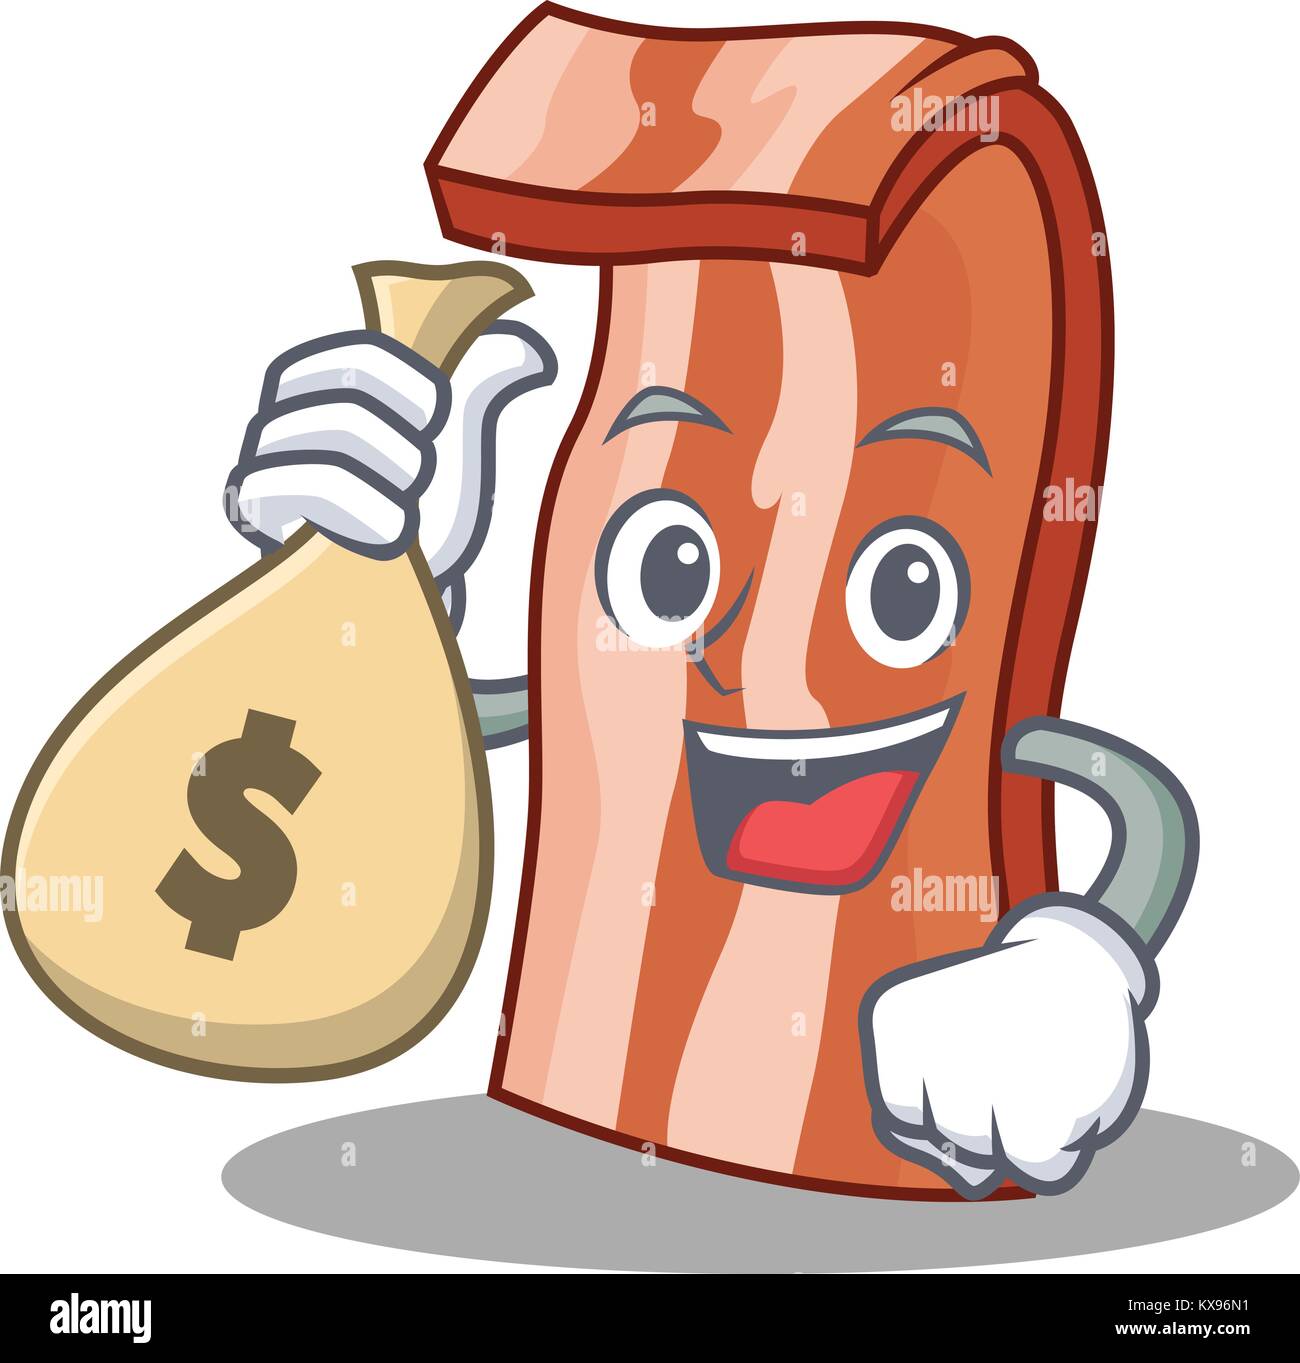 With money bag bacon character cartoon style Stock Vector